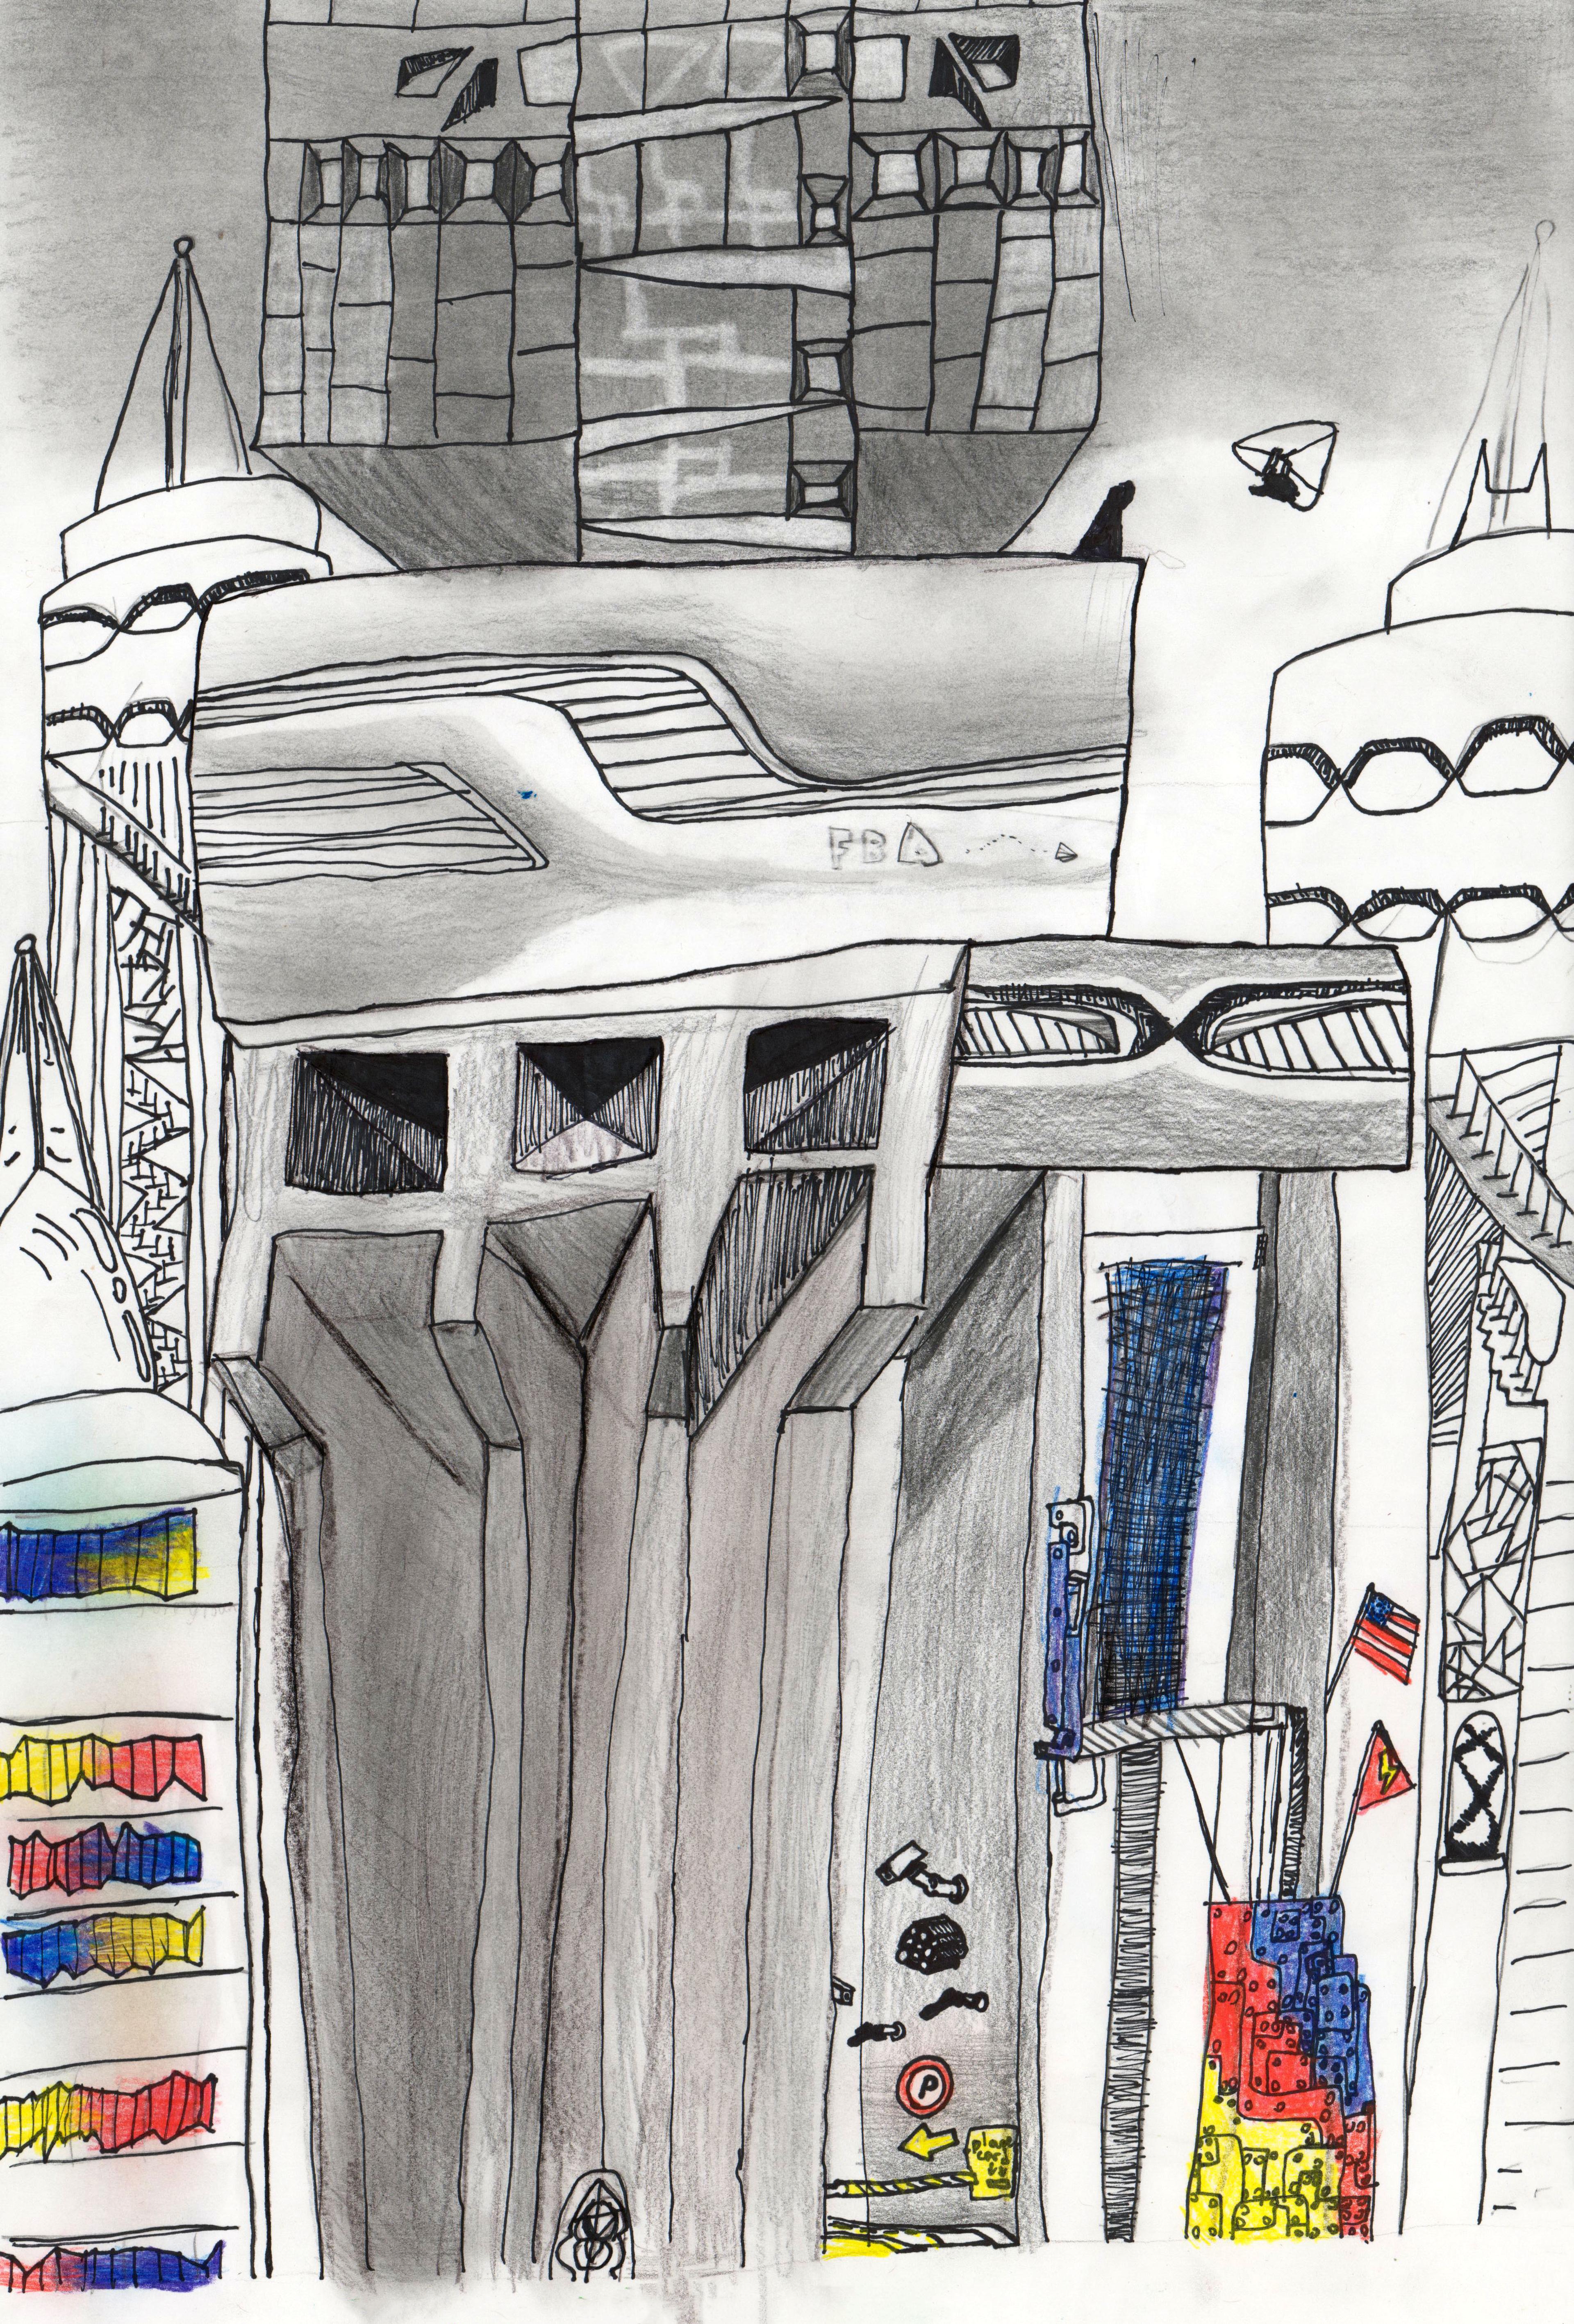 Graphite-and–colored pencil illustration of a tall indoor car parking lot building with an airplane parking lot on the roof. Above the airplane lot is an apartment building rising up out of the top of the frame. The buildings are gray, with lighter colored skyscrapers in the background at left and right. Small parking signs and a surveillance camera are shown near the bottom center of the image. A small American flag and red triangular flag hang from poles near the bottom and to the right. Small rows and columns of red, yellow, and blue windows adorn the buildings at the bottom left and right areas of the illustation.